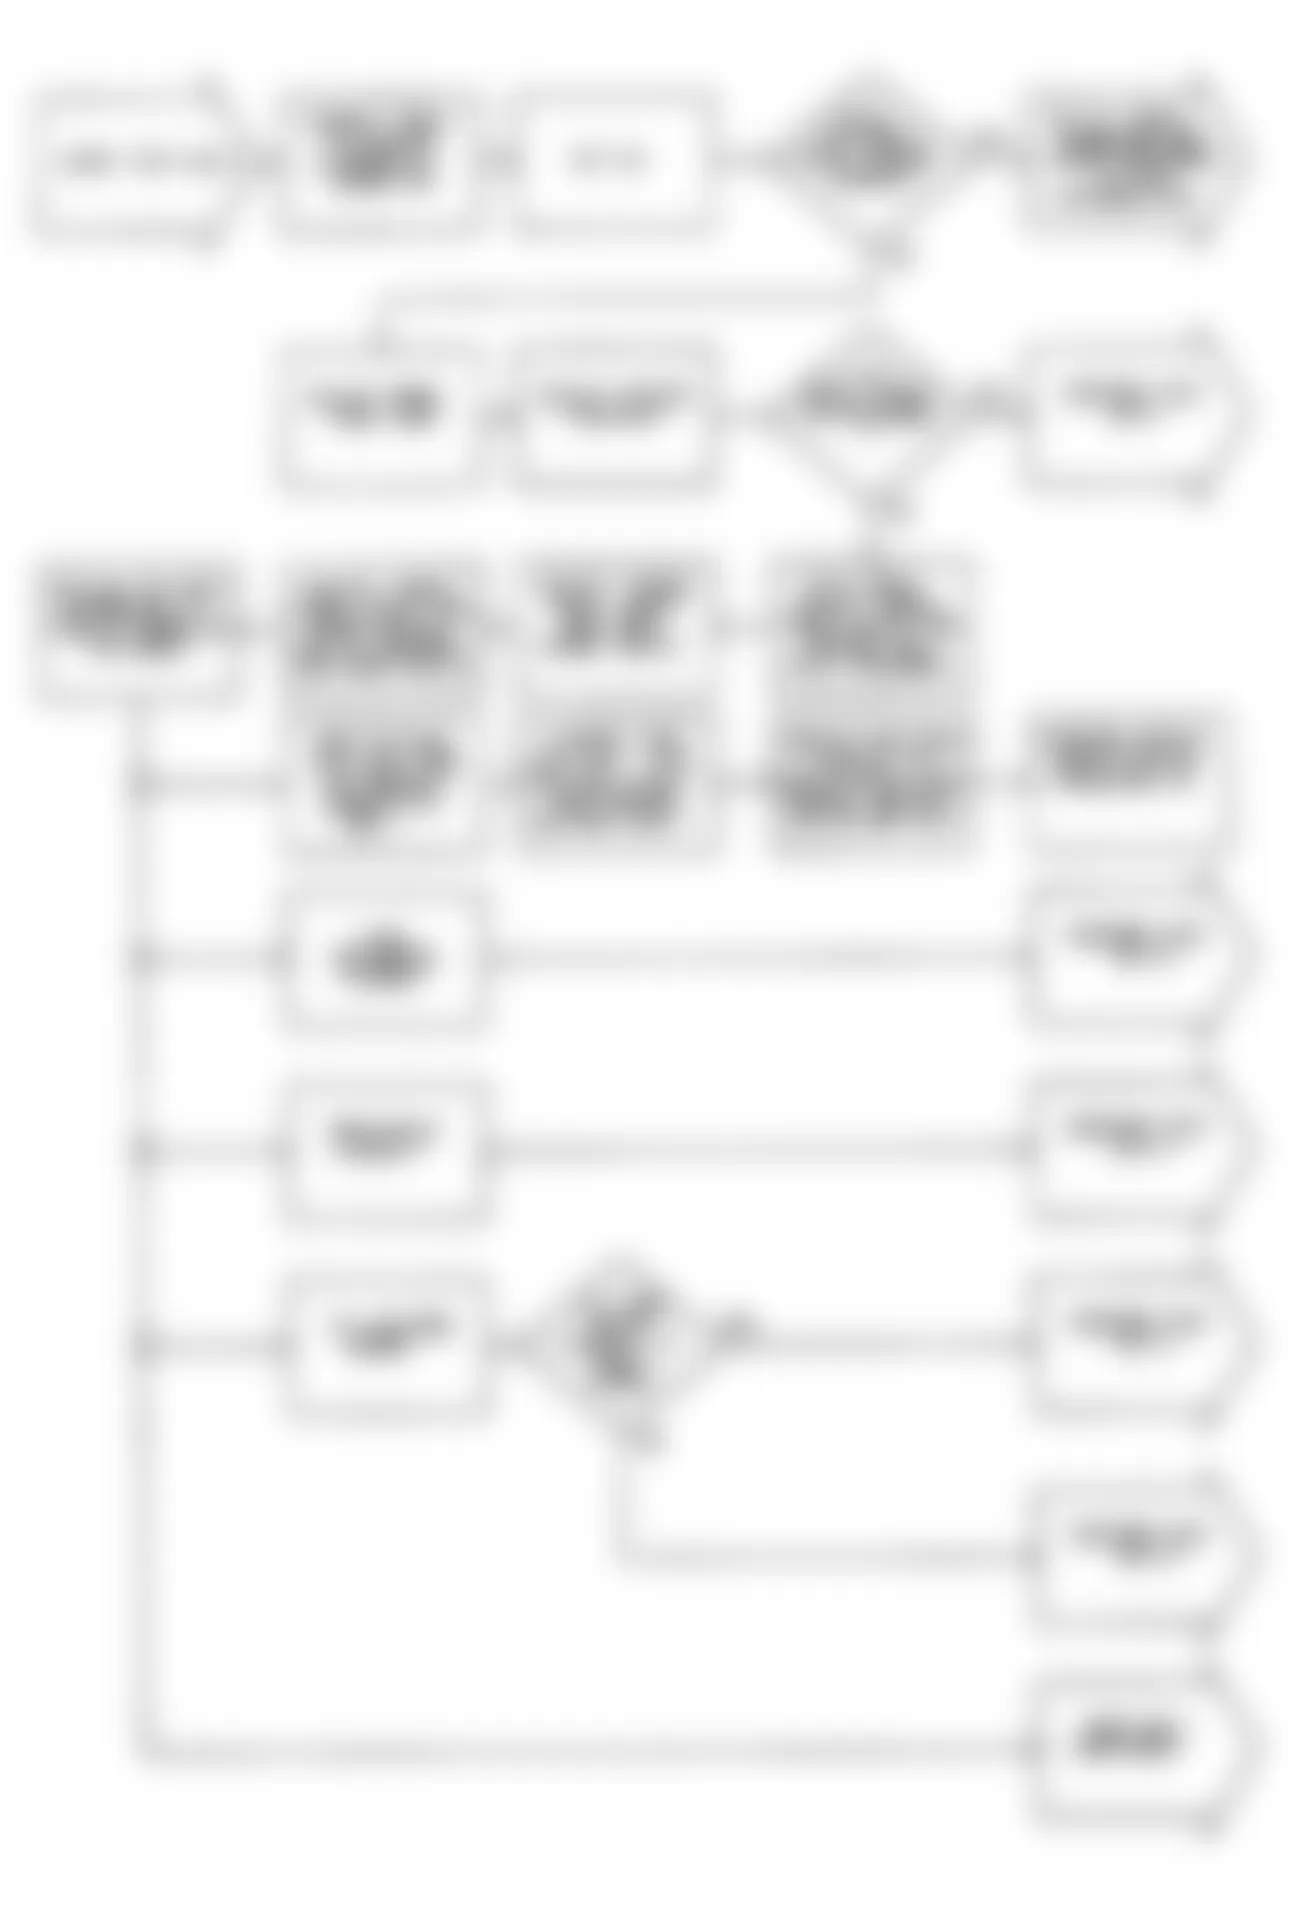 Dodge Dynasty LE 1990 - Component Locations -  NS2: Flow Chart (1 of 2)